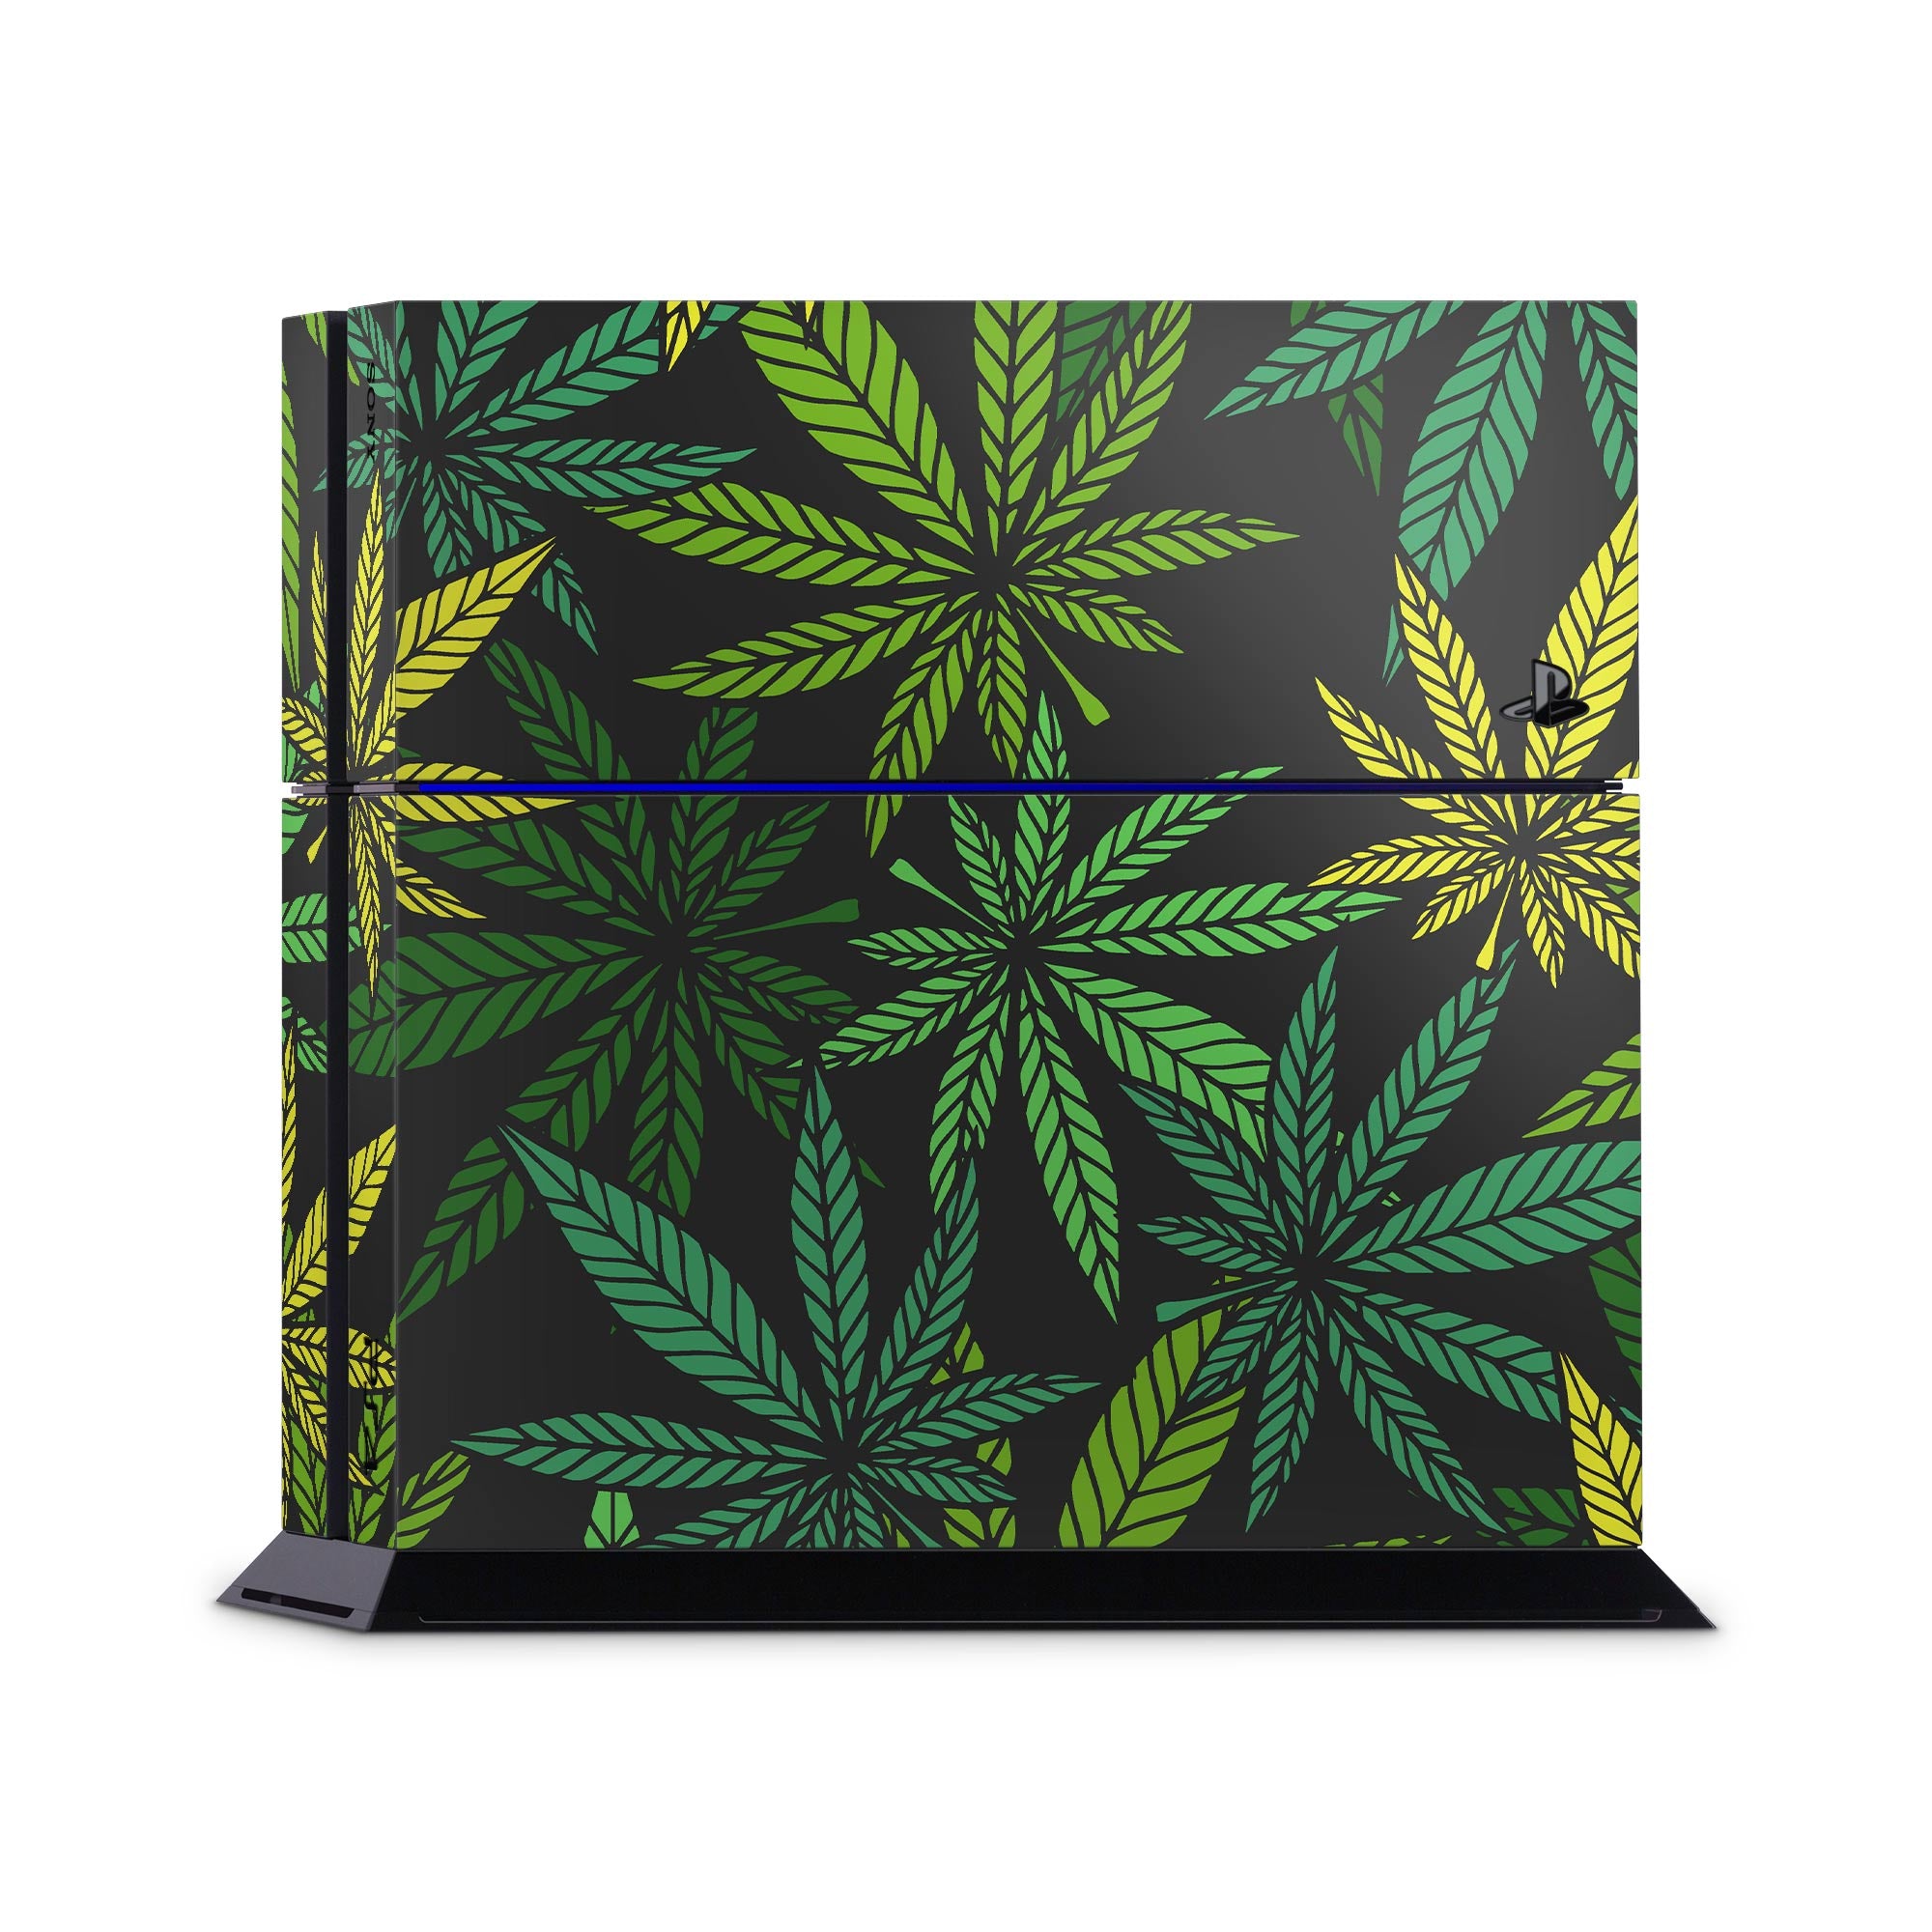 420 - PS4 Console Skin